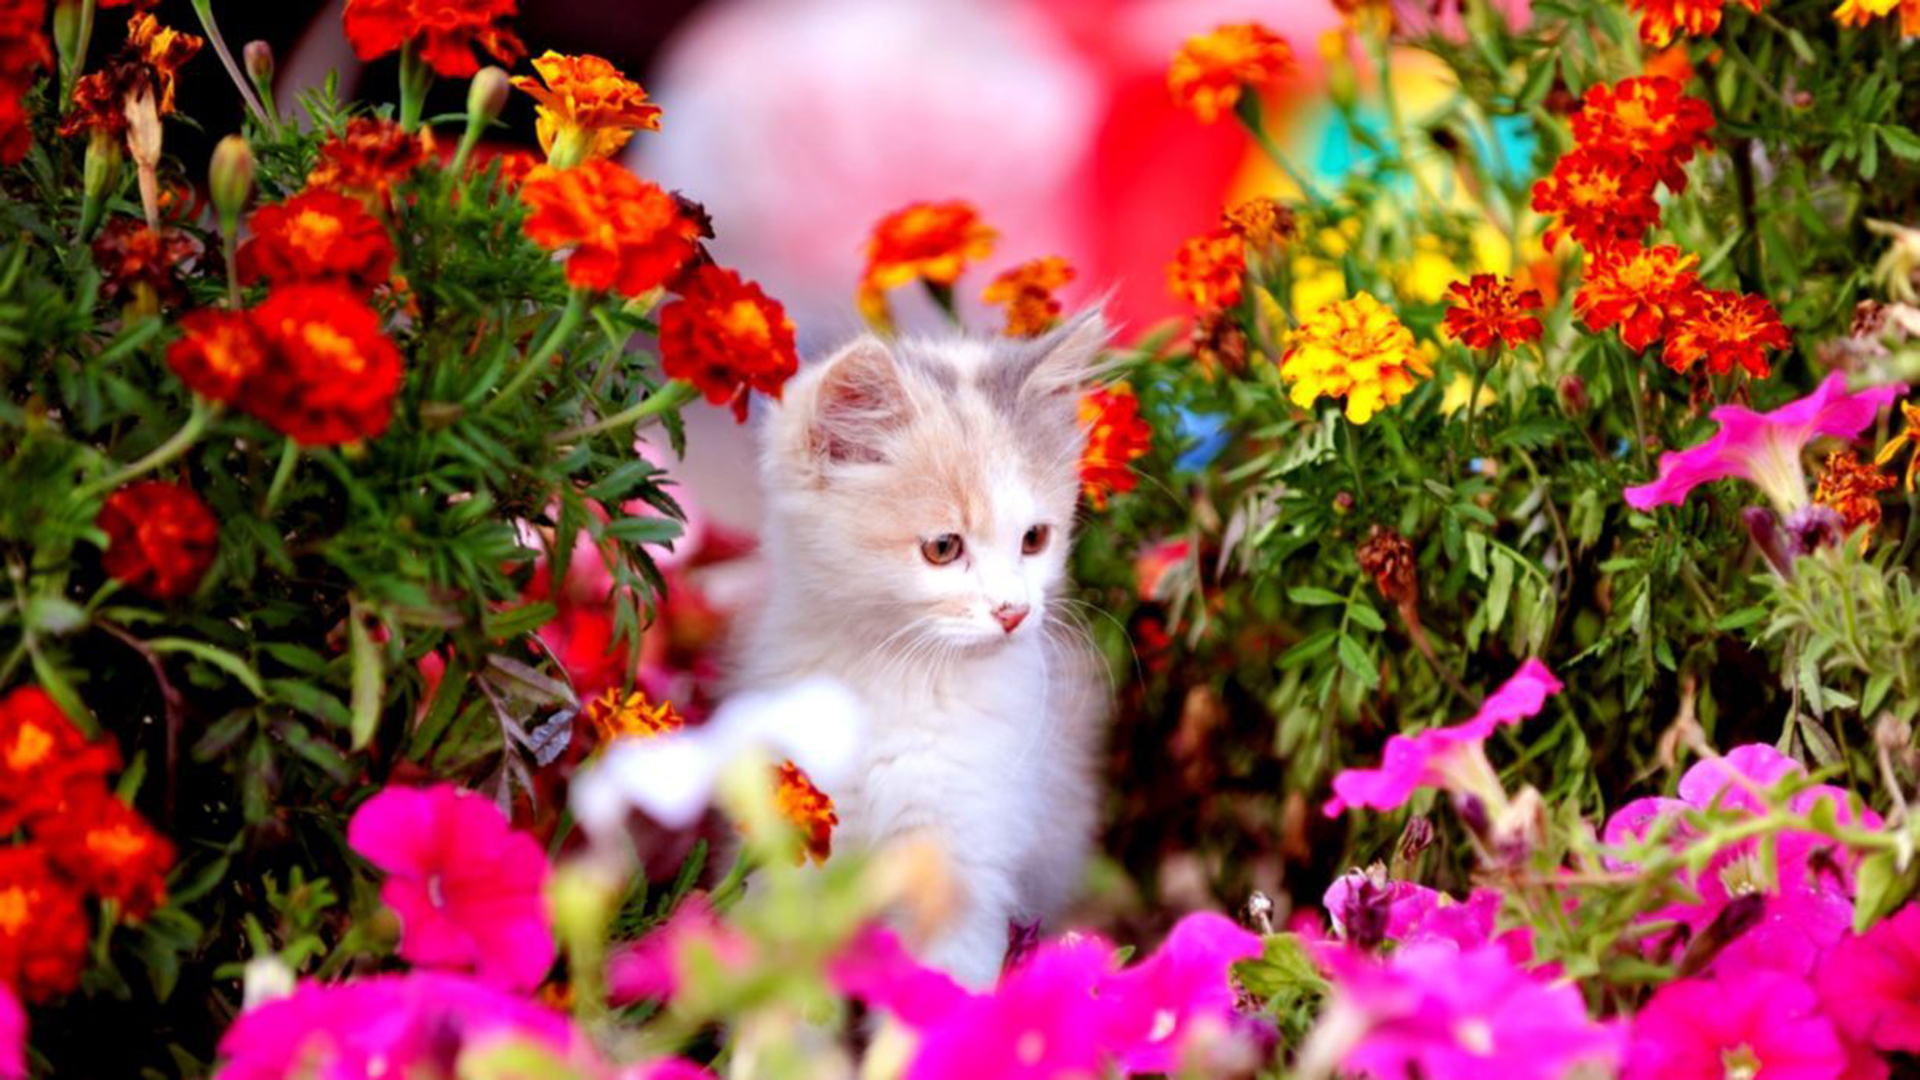 Cute Spring Backgrounds